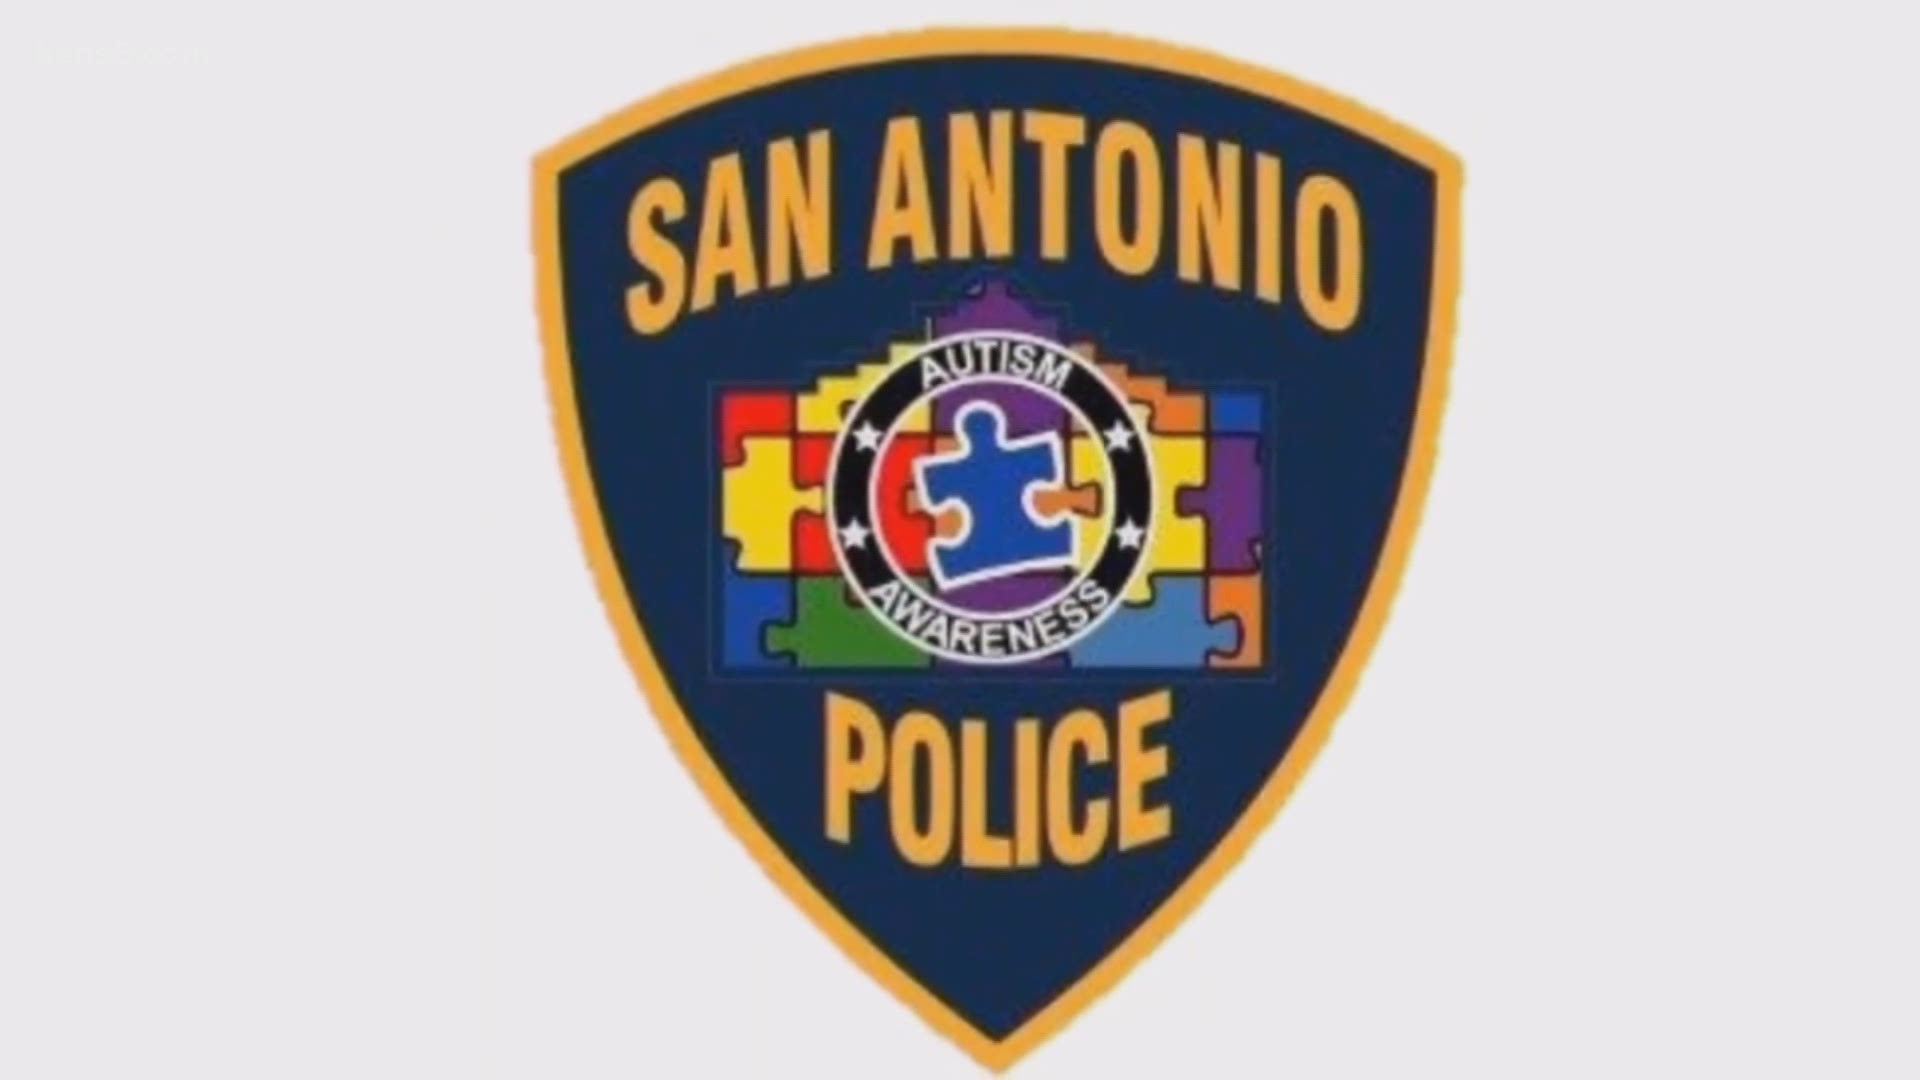 In honor of National Autism Awareness Month, some San Antonio Police Department officers are wearing a unique puzzle piece patch as part of their uniforms.